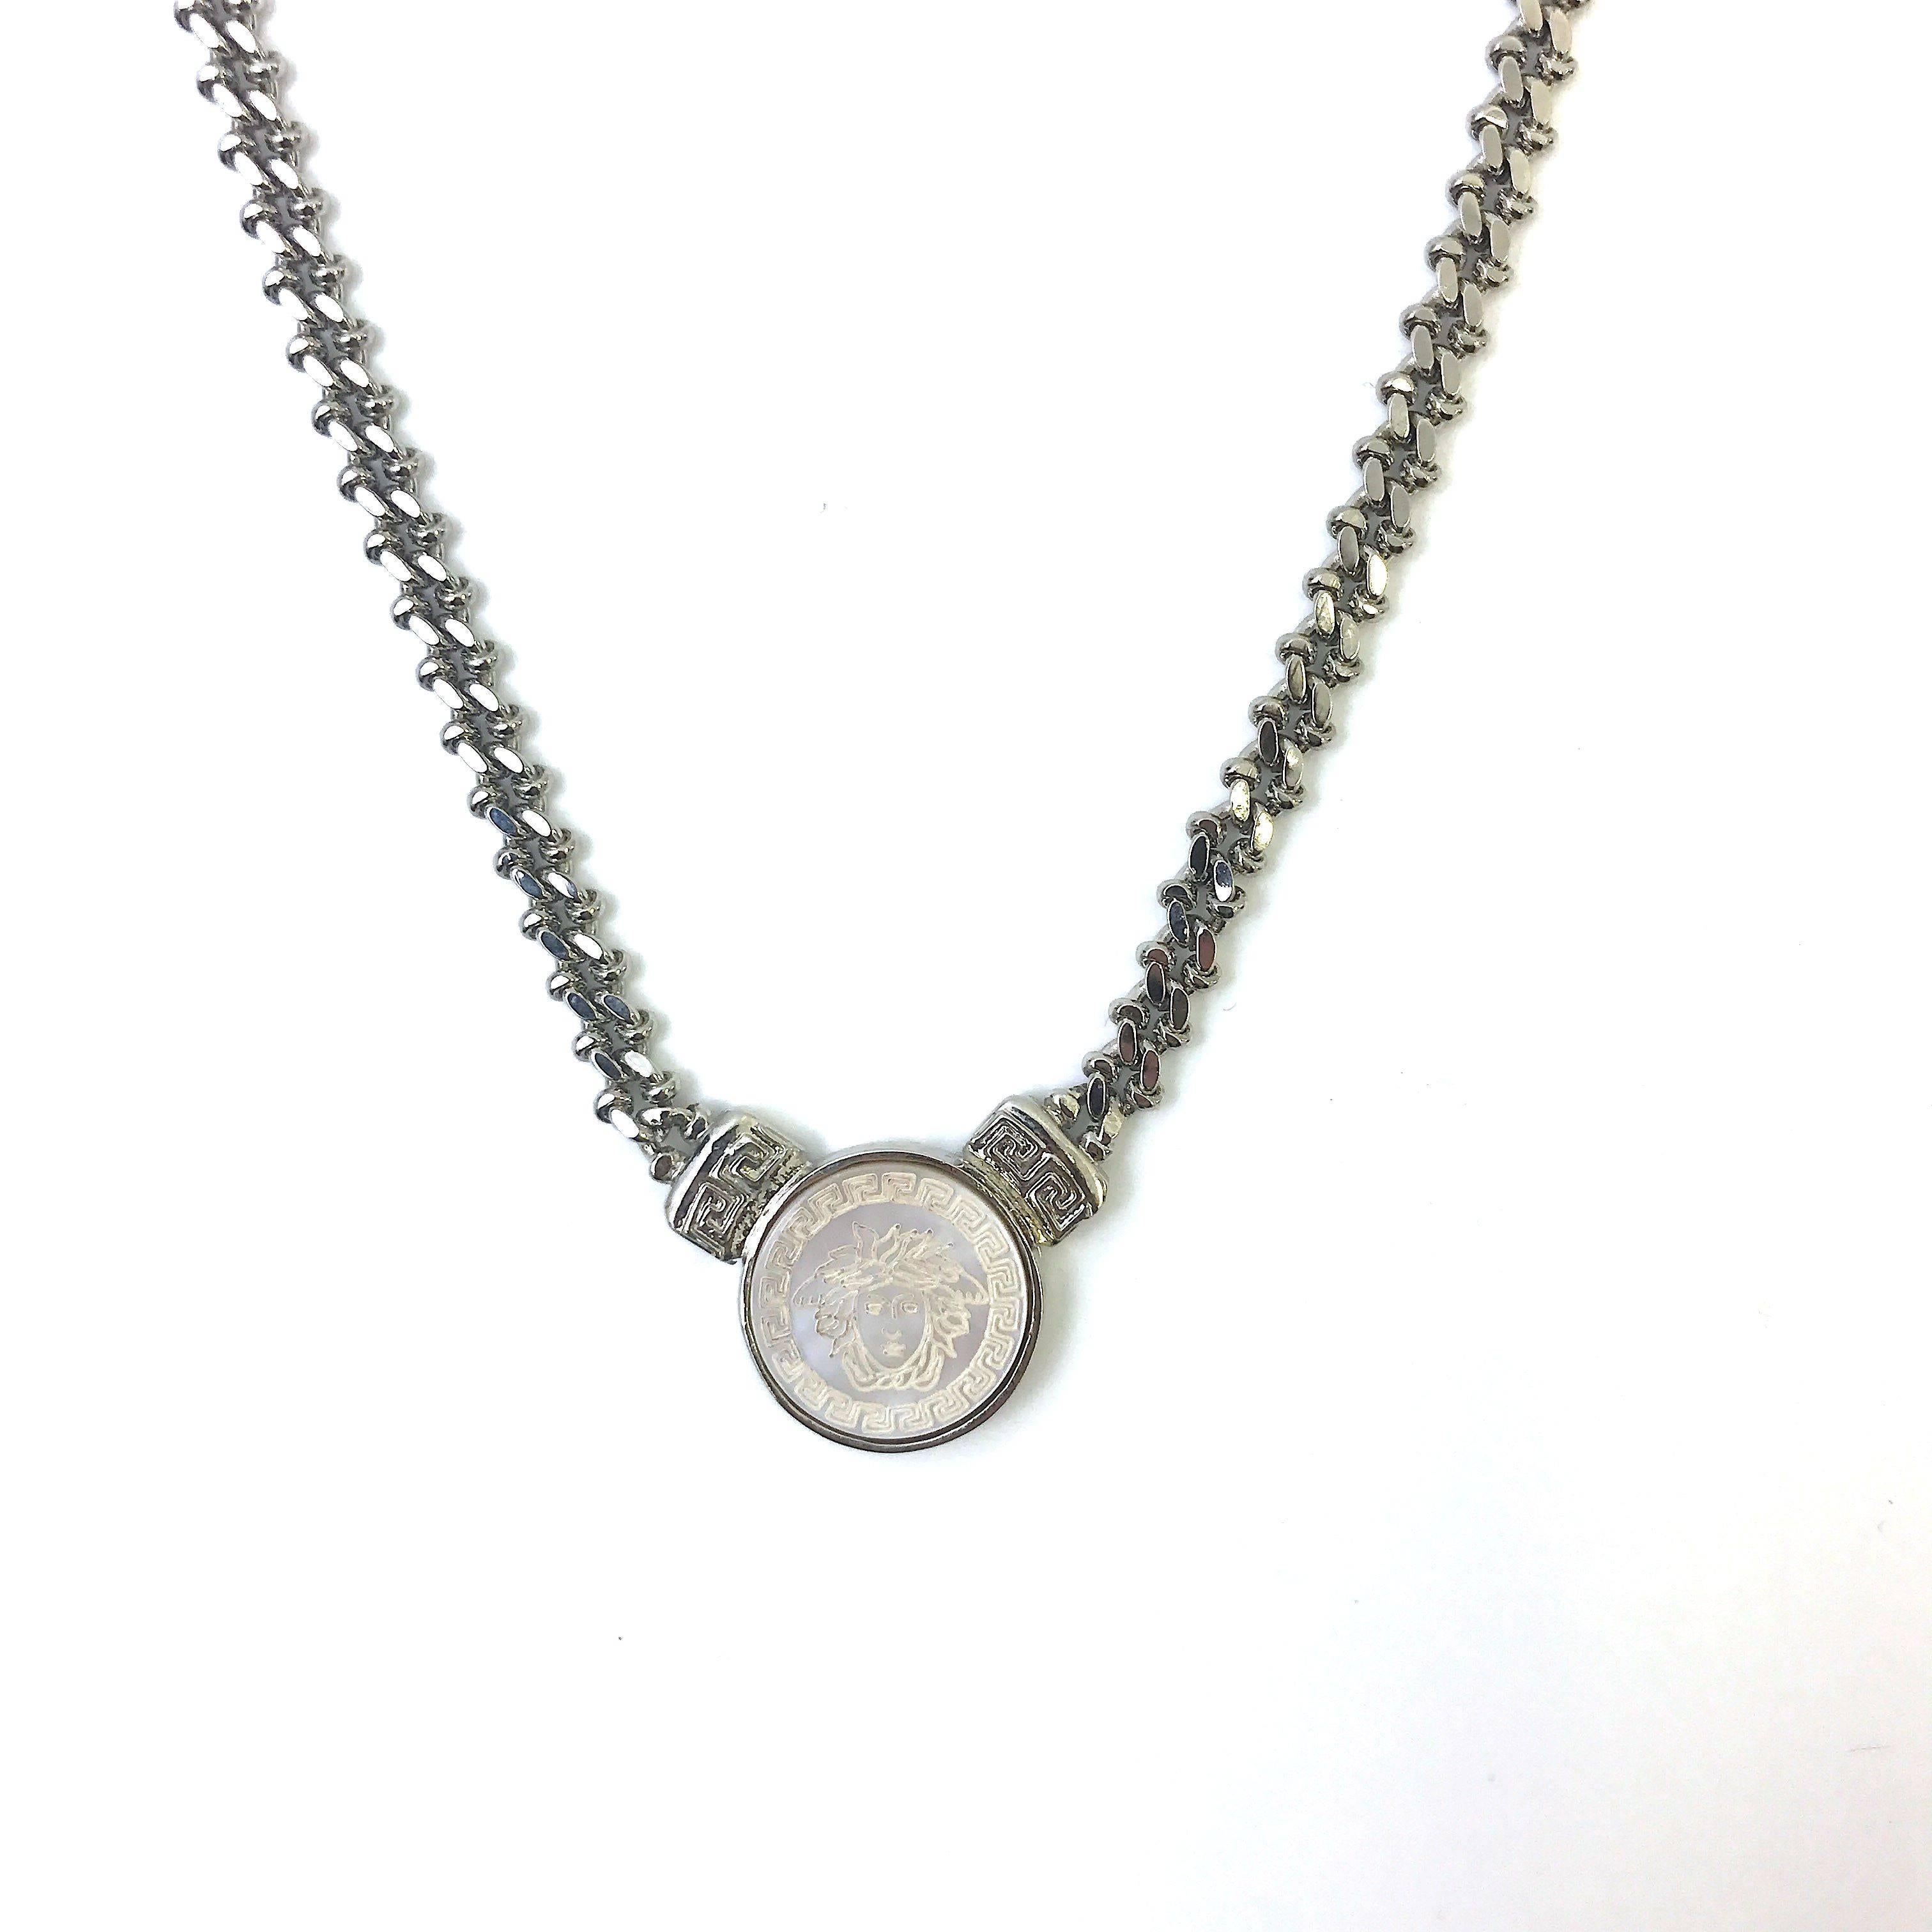 A very rare and timeless piece from the 1990's by designer Gianni Versace. The piece features a very unique curb style chain in a stunning silver toned metal. It is beautifully finished off with a detailed engraved medusa head on a mother of pearl